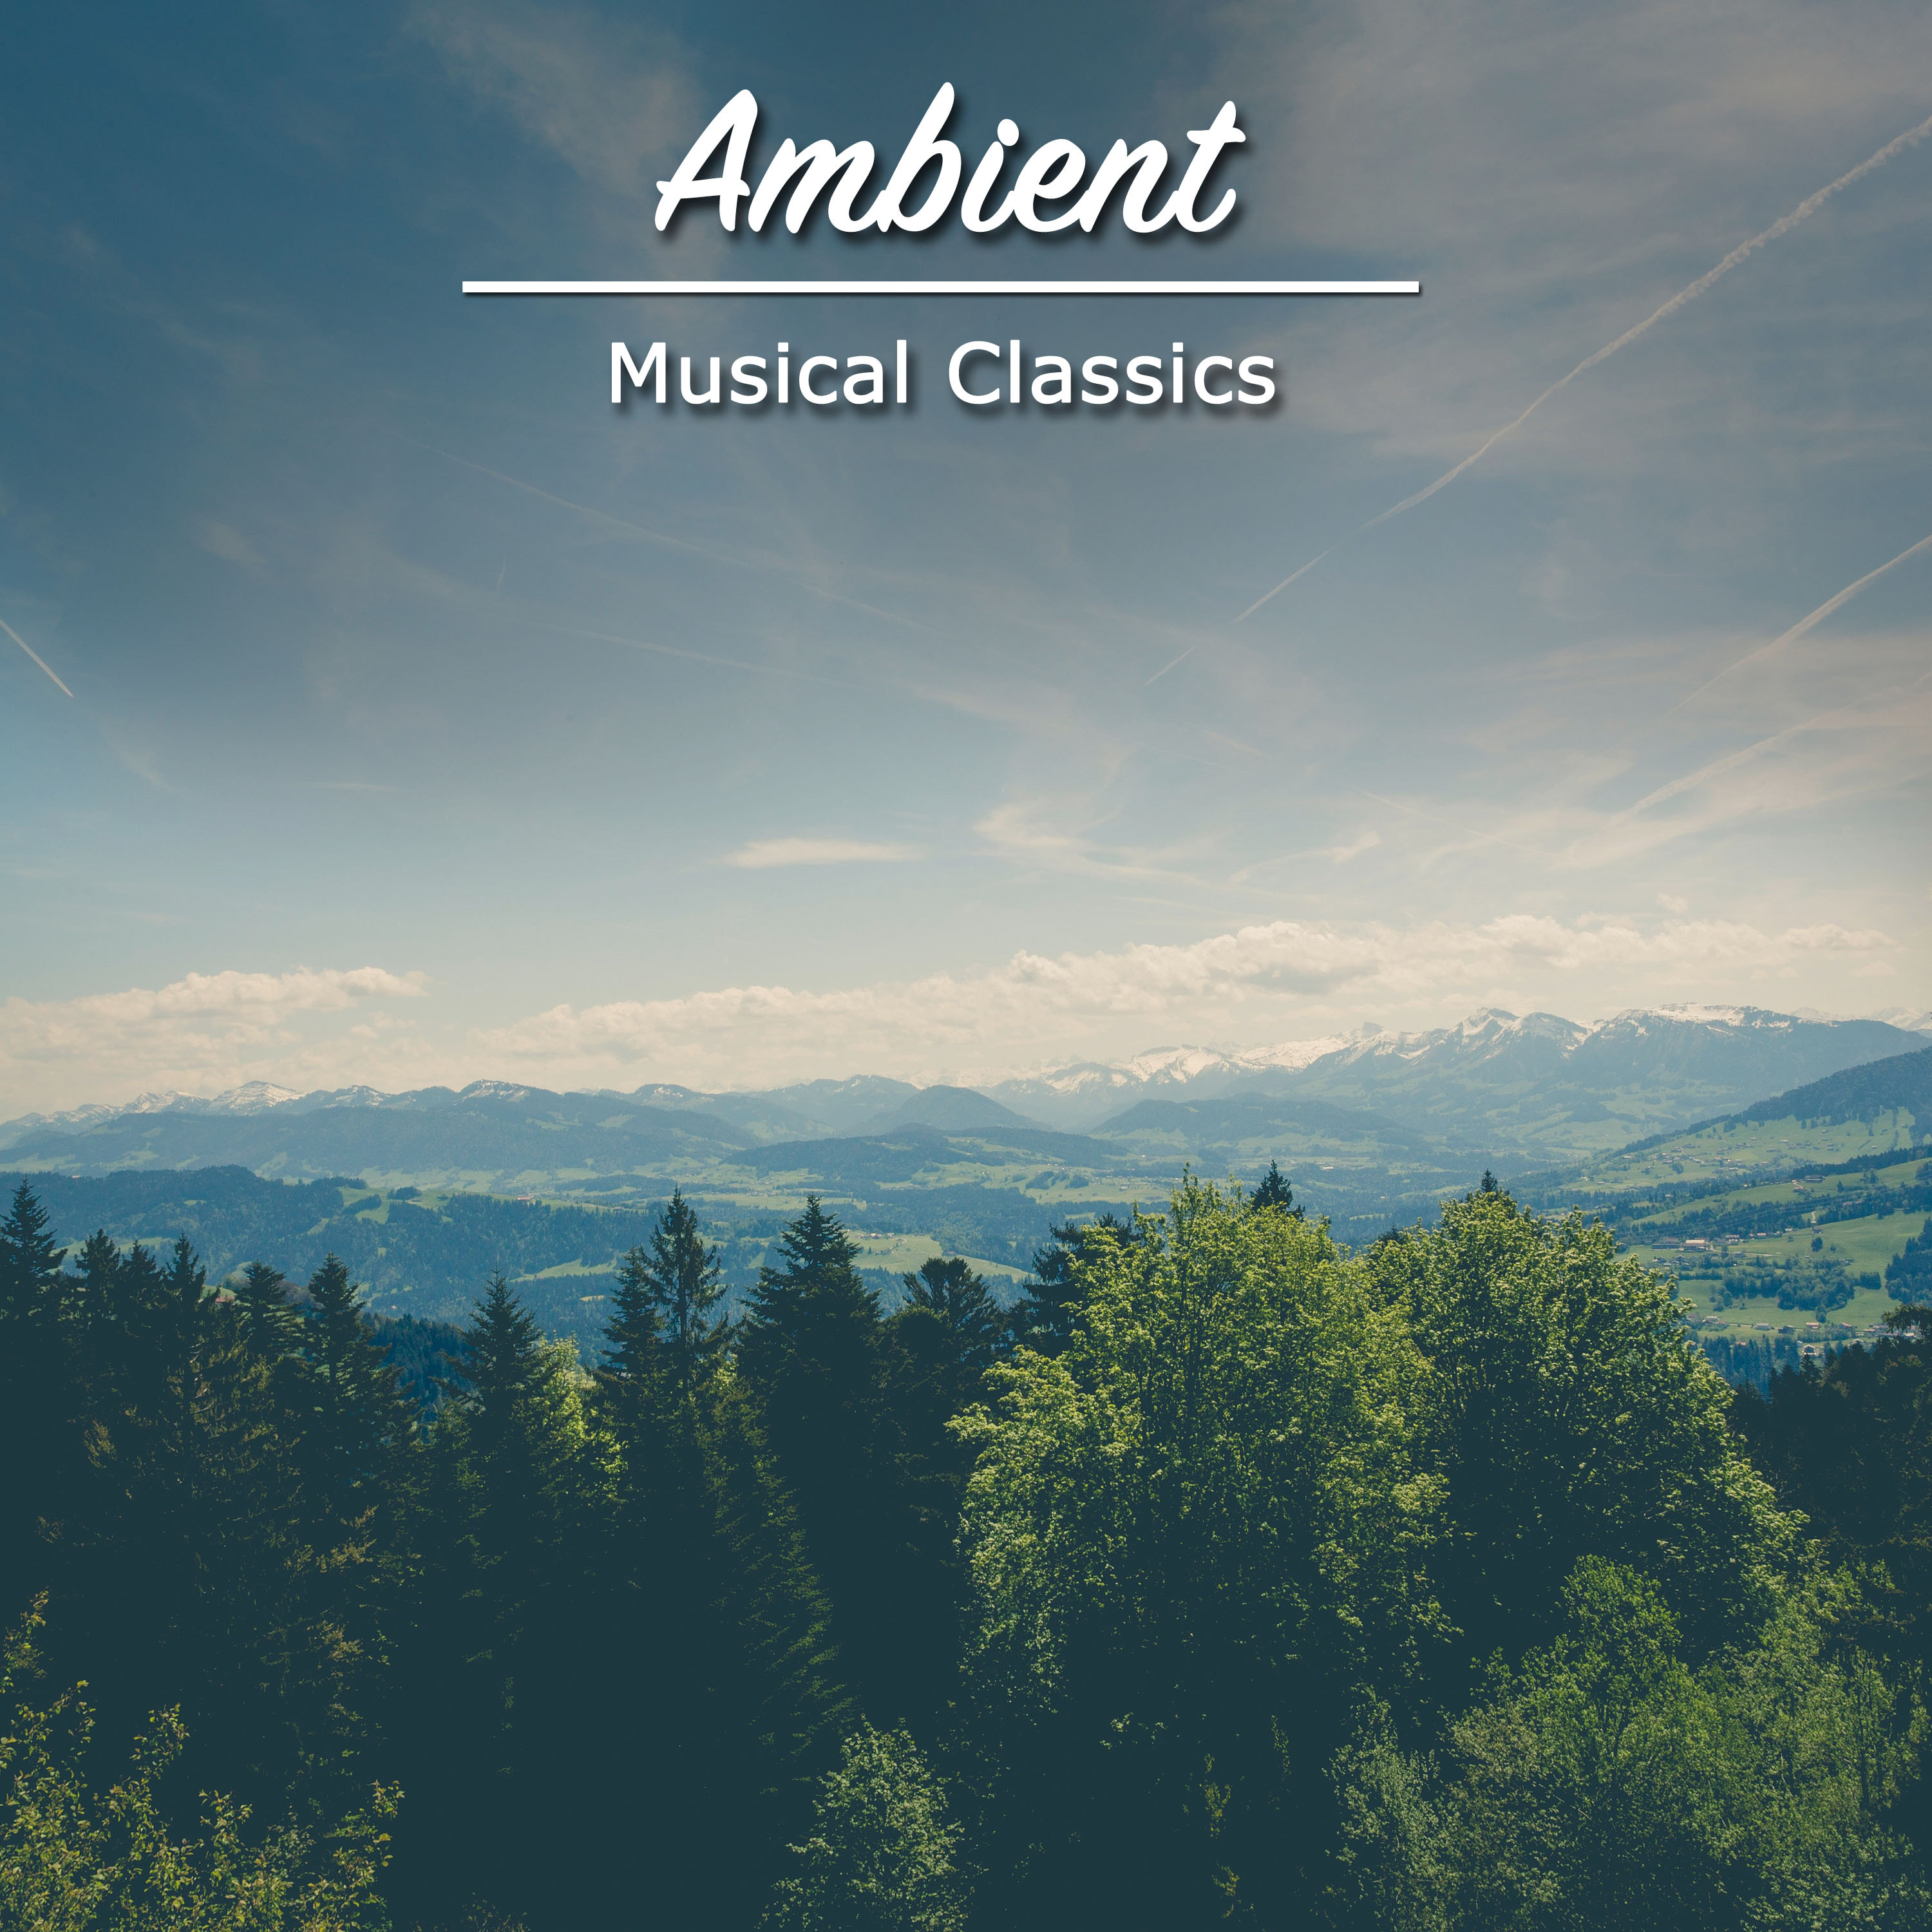 #1 Hour of Ambient Musical Classics for Zen Relaxation & Meditation